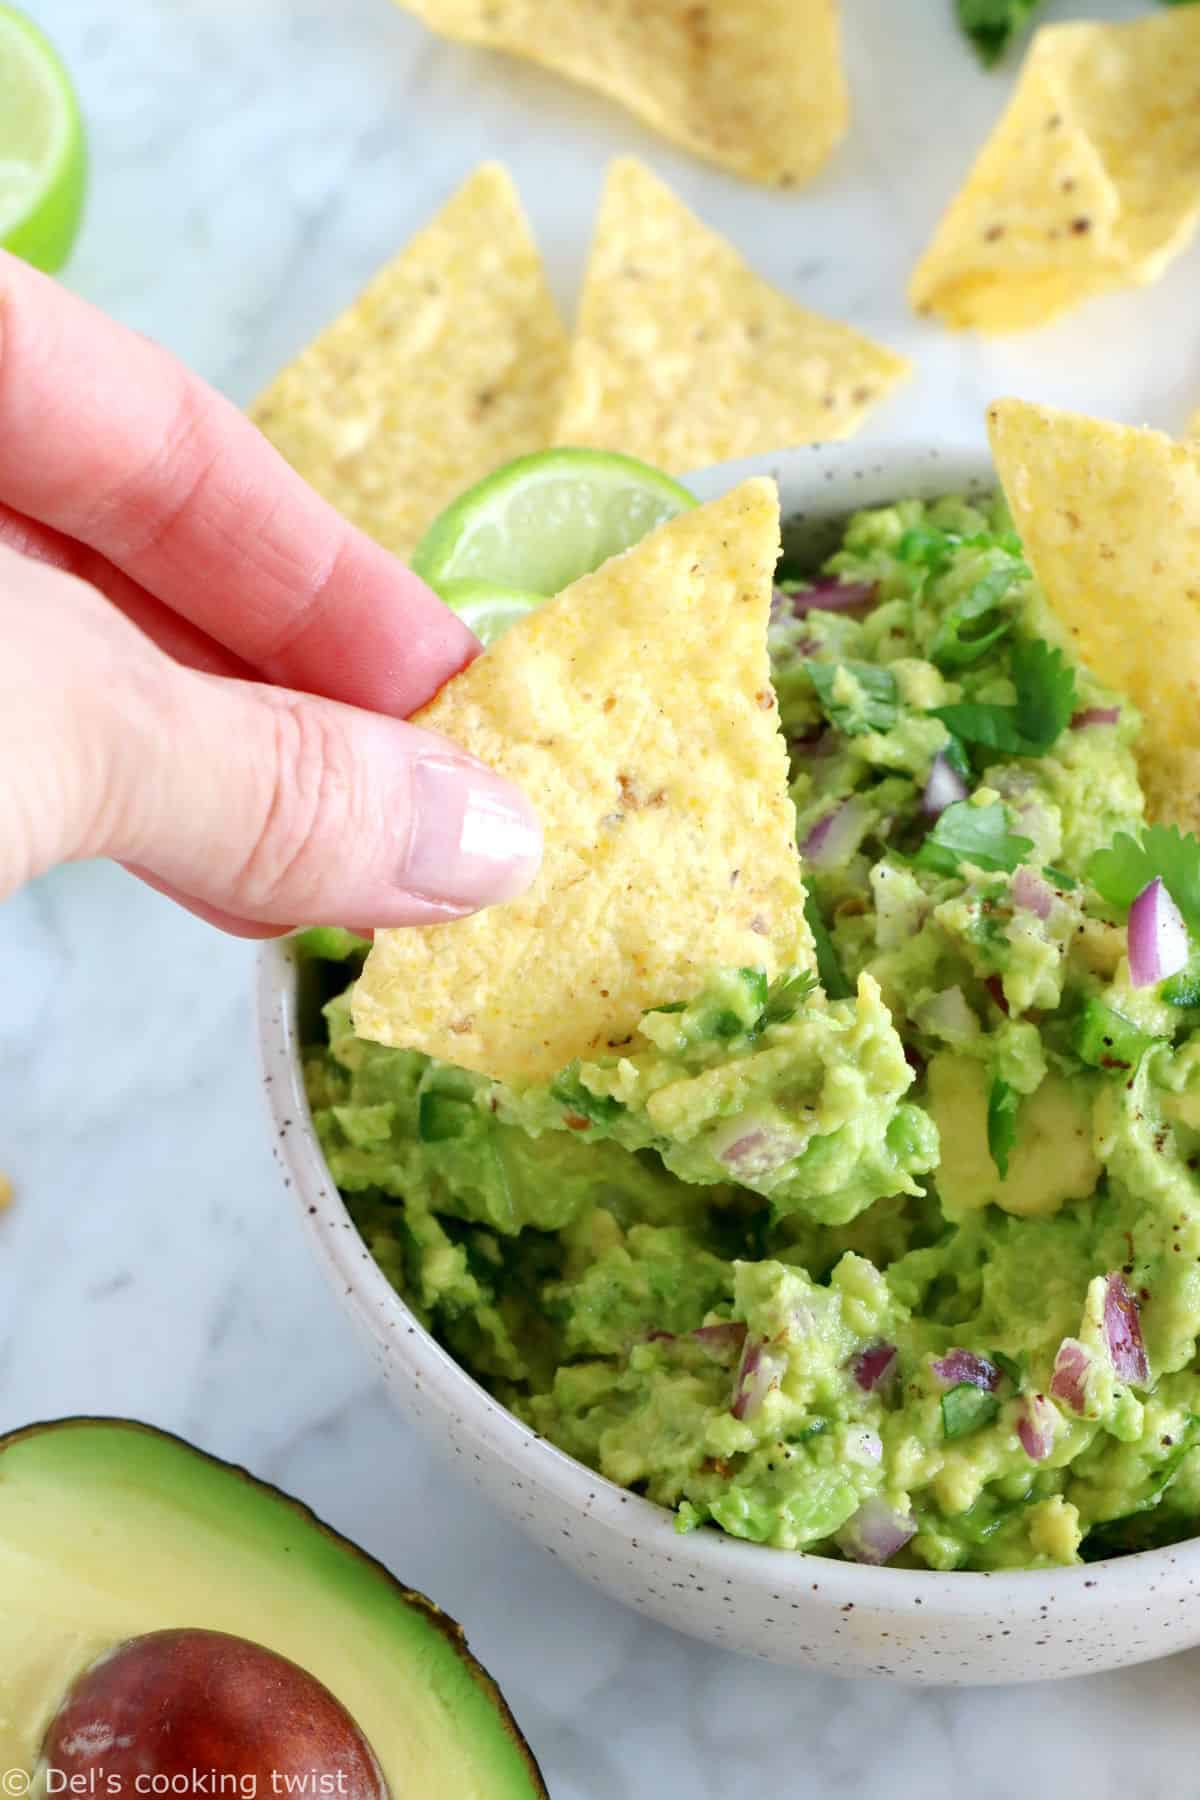 This is hands down the best guacamole recipe out there. Easy to make, with just 6 ingredients, this authentic guacamole is perfectly creamy, loaded with refreshing flavors, and always a hit at parties.